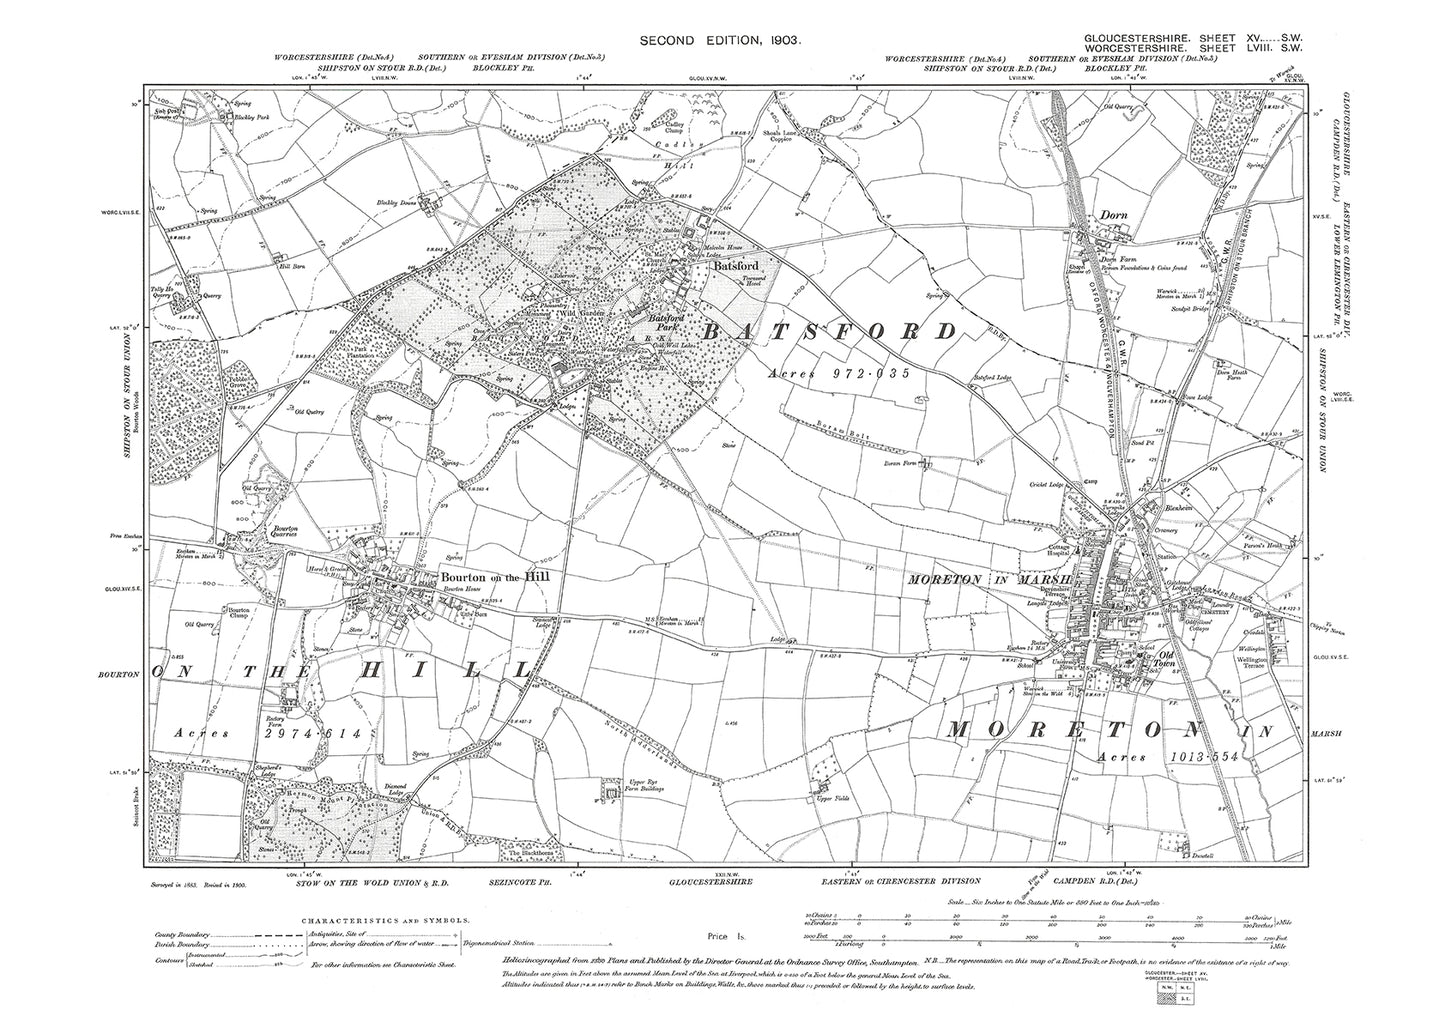 Old OS map dated 1903, showing Bourton on the Hill, Batsford, Moreton in Marsh in Gloucestershire - 15SW